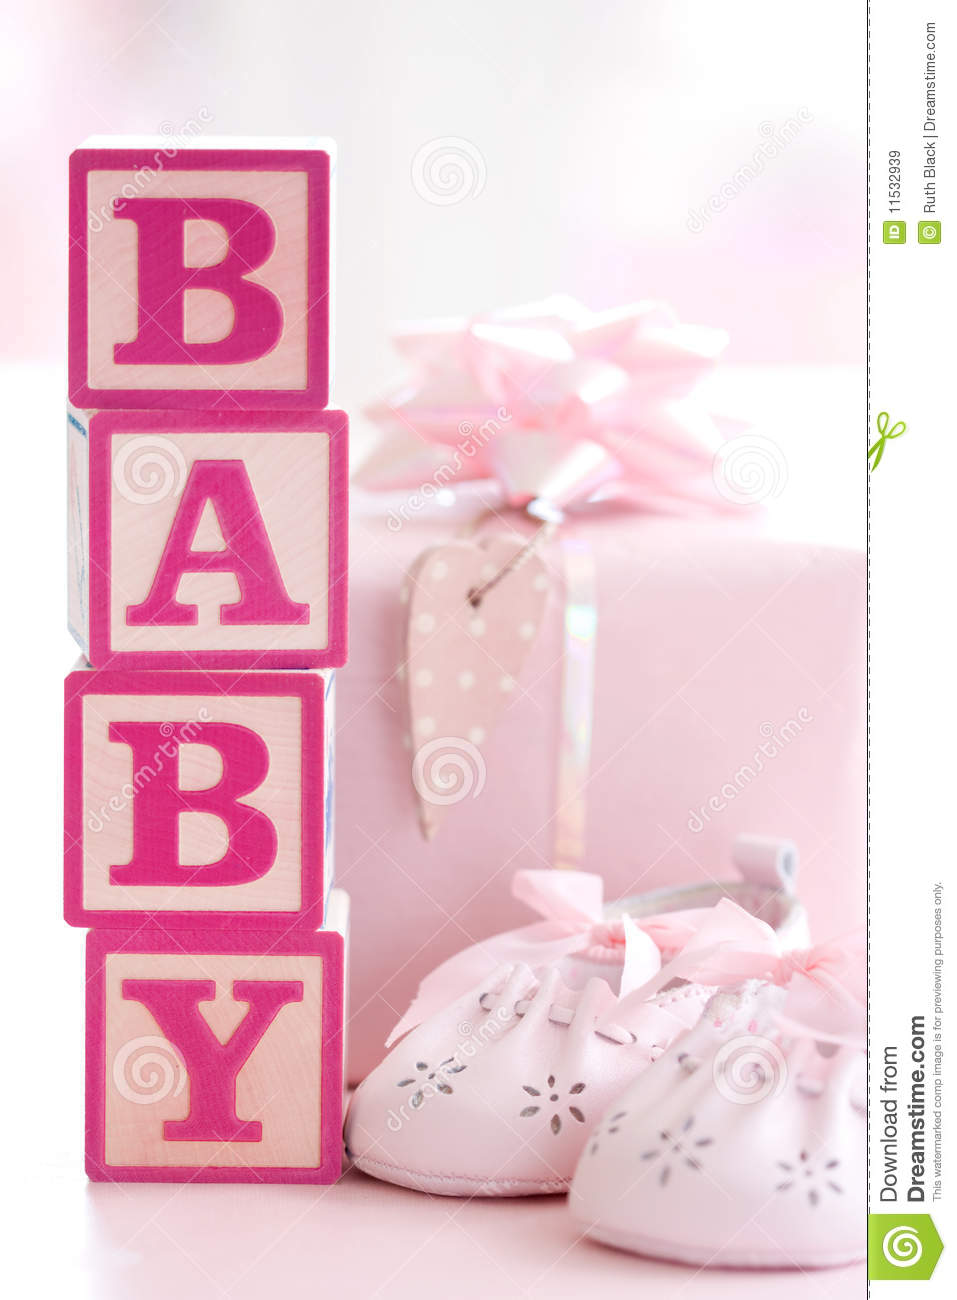 Concept Shot For Baby Shower Or New Baby Mr No Pr No 5 2334 39